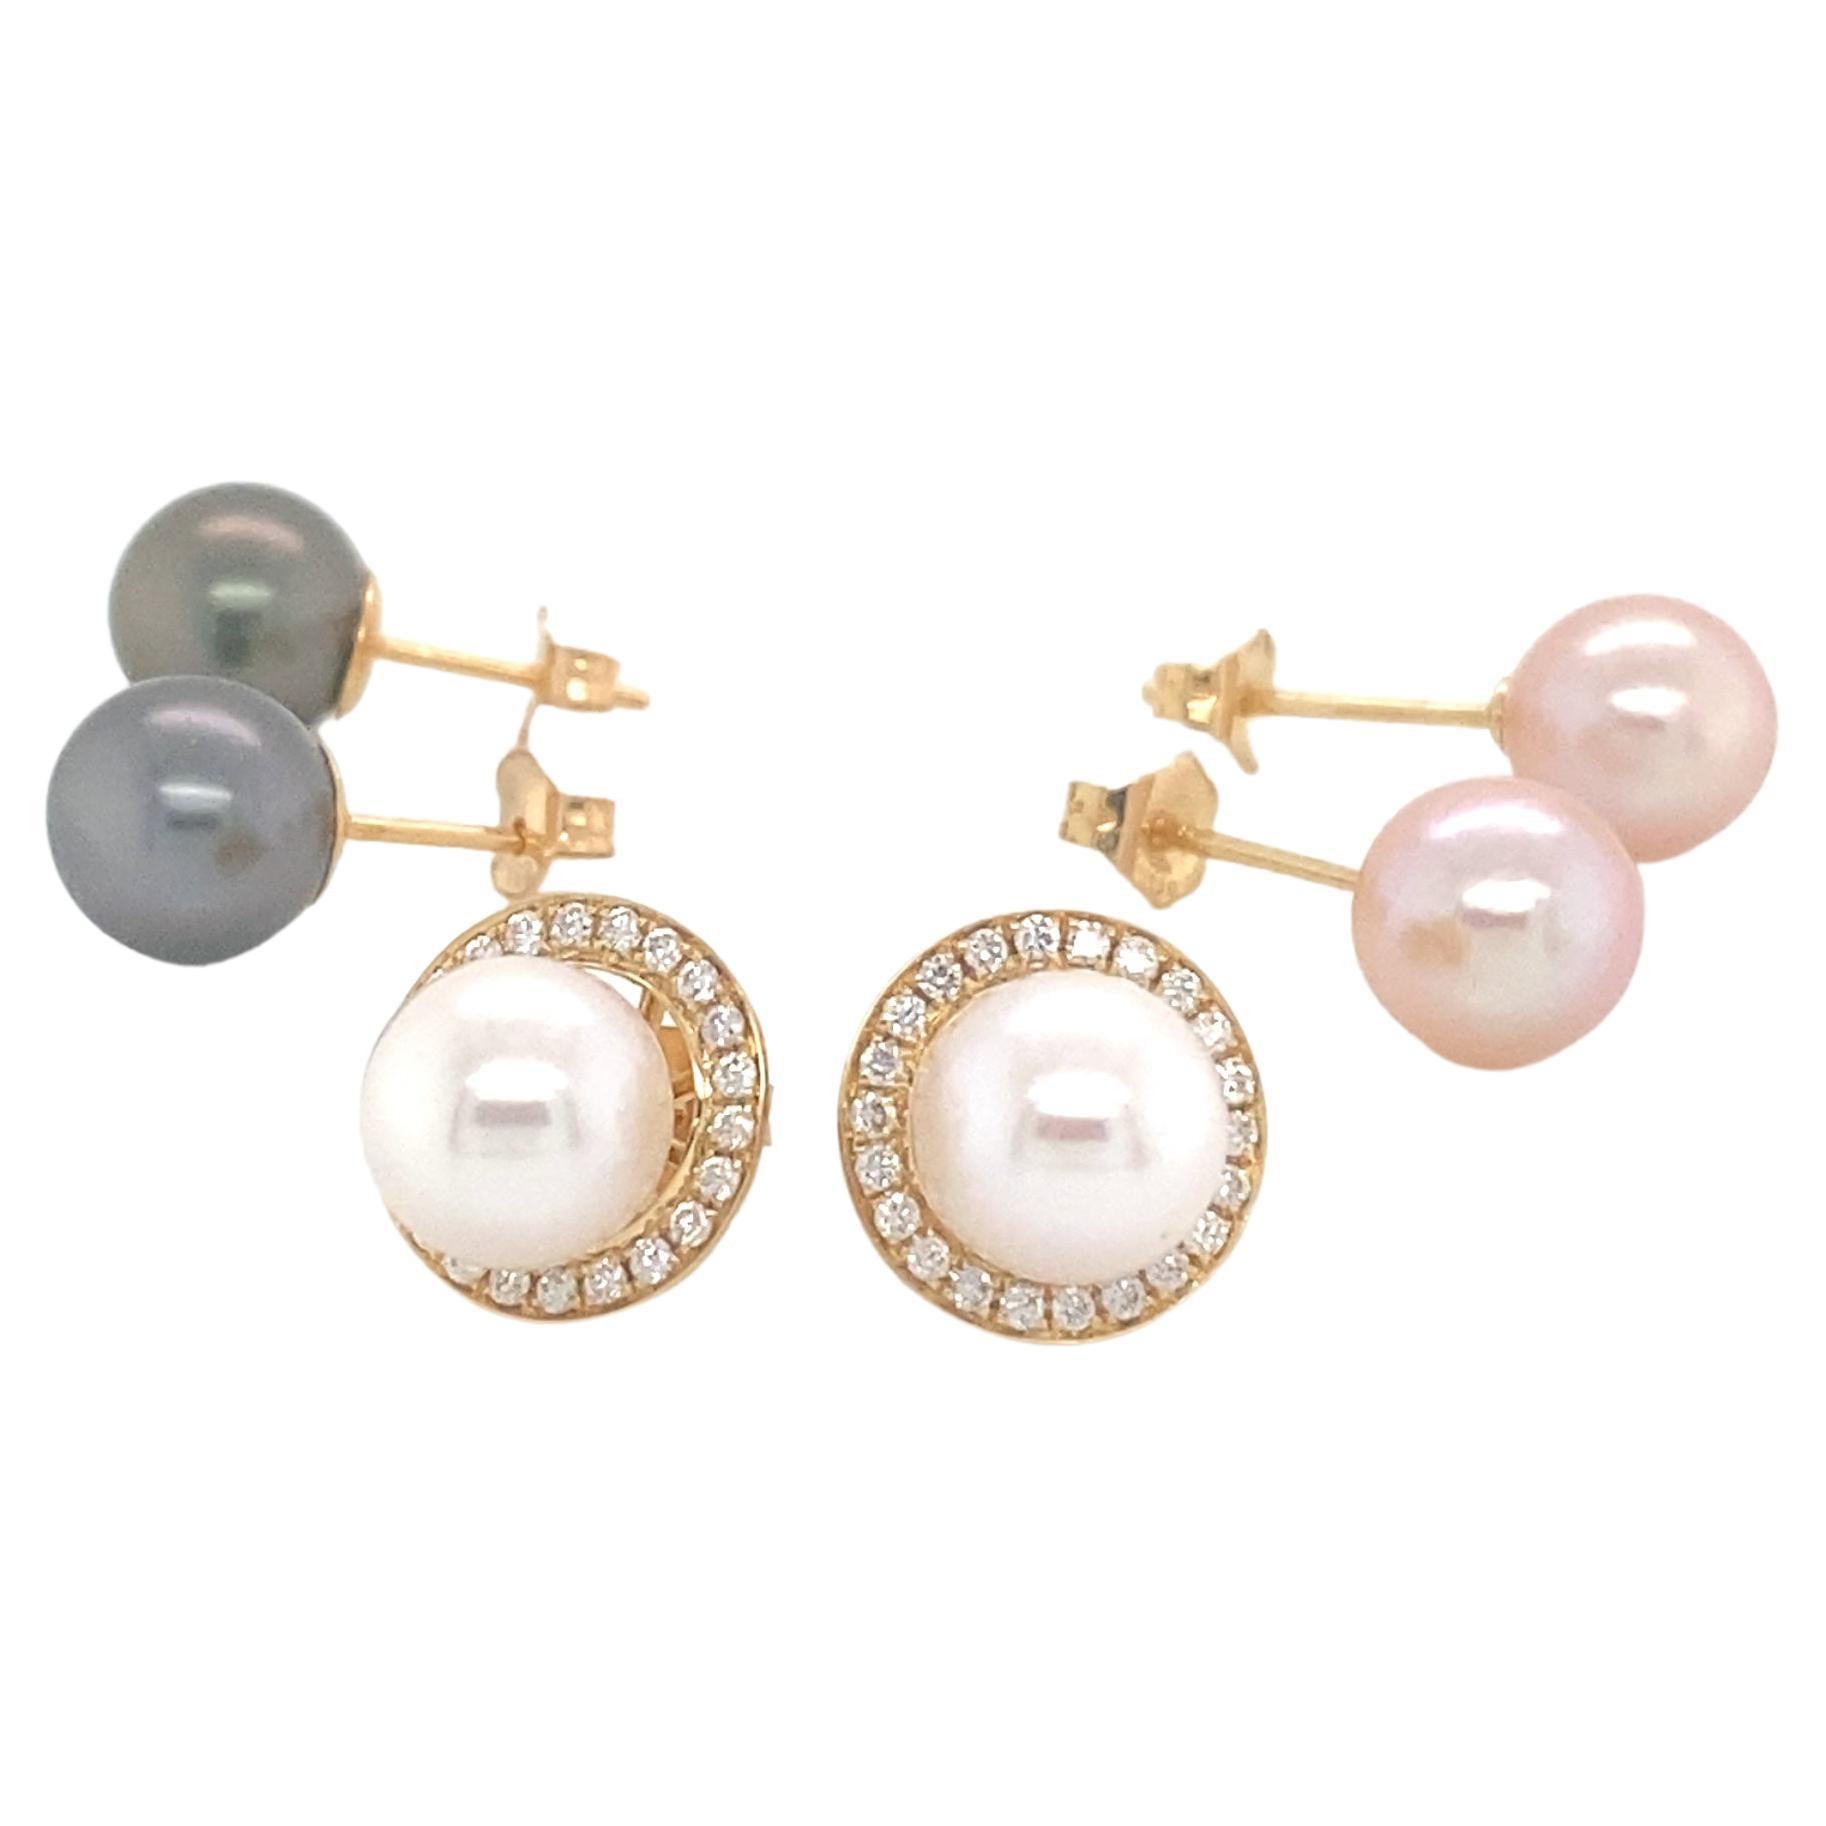 Earrings Interchangeable Cultured Pearl and Diamonds and 18k Yellow Gold